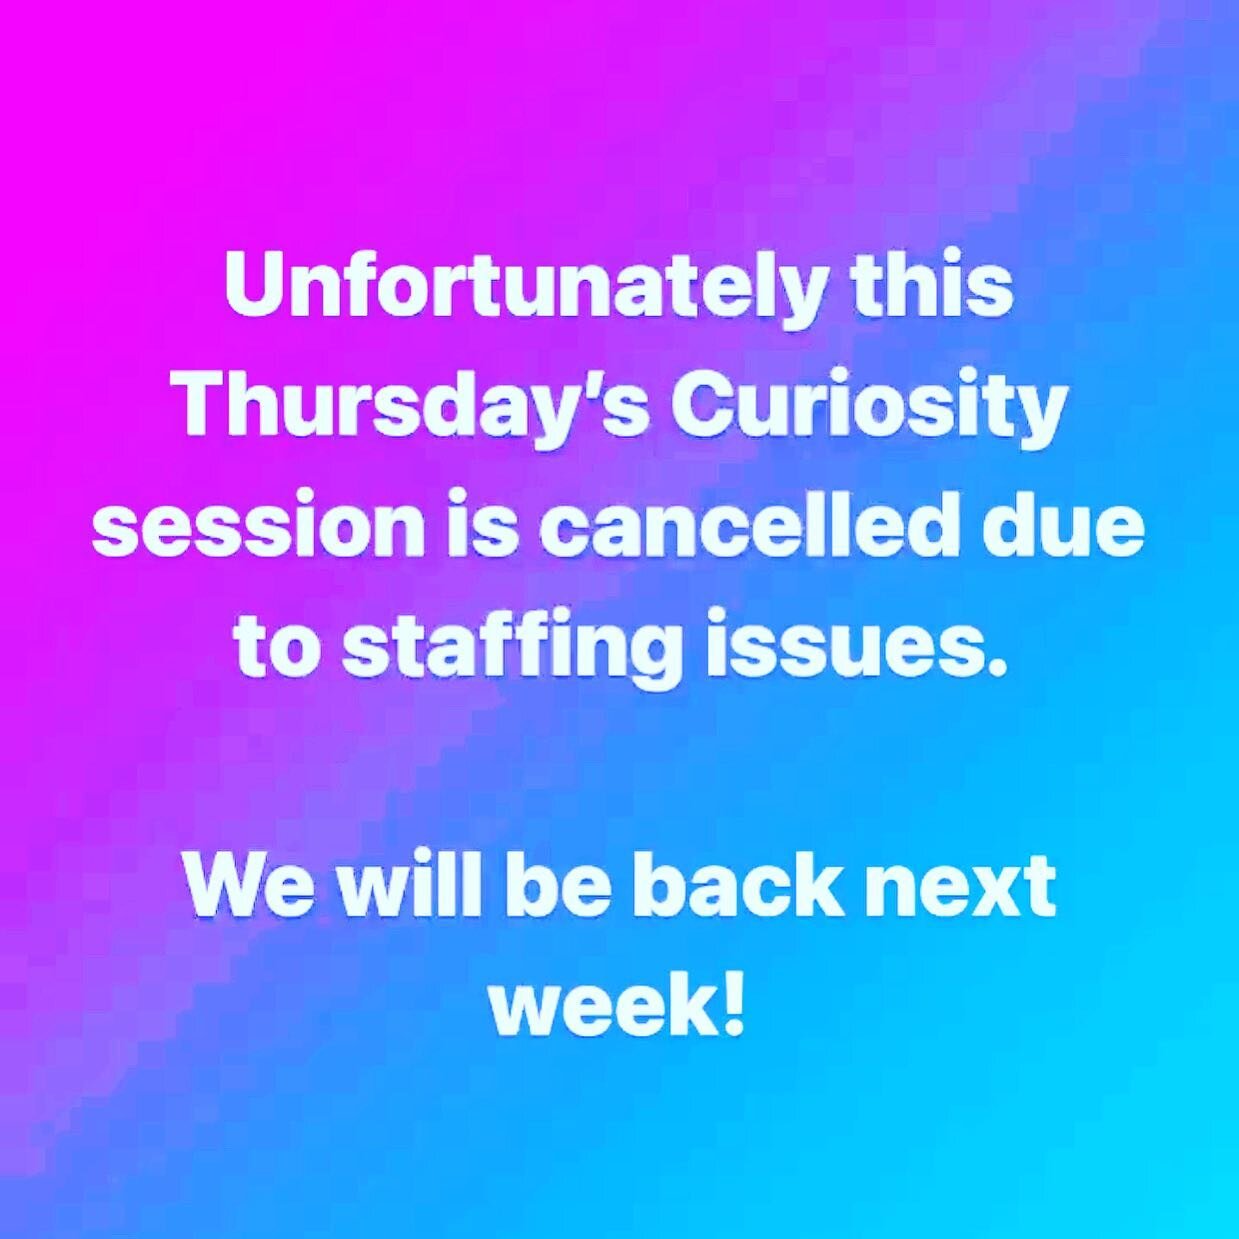 Unfortunately this weeks Curiosity session will not be going ahead but we will be back next week!!